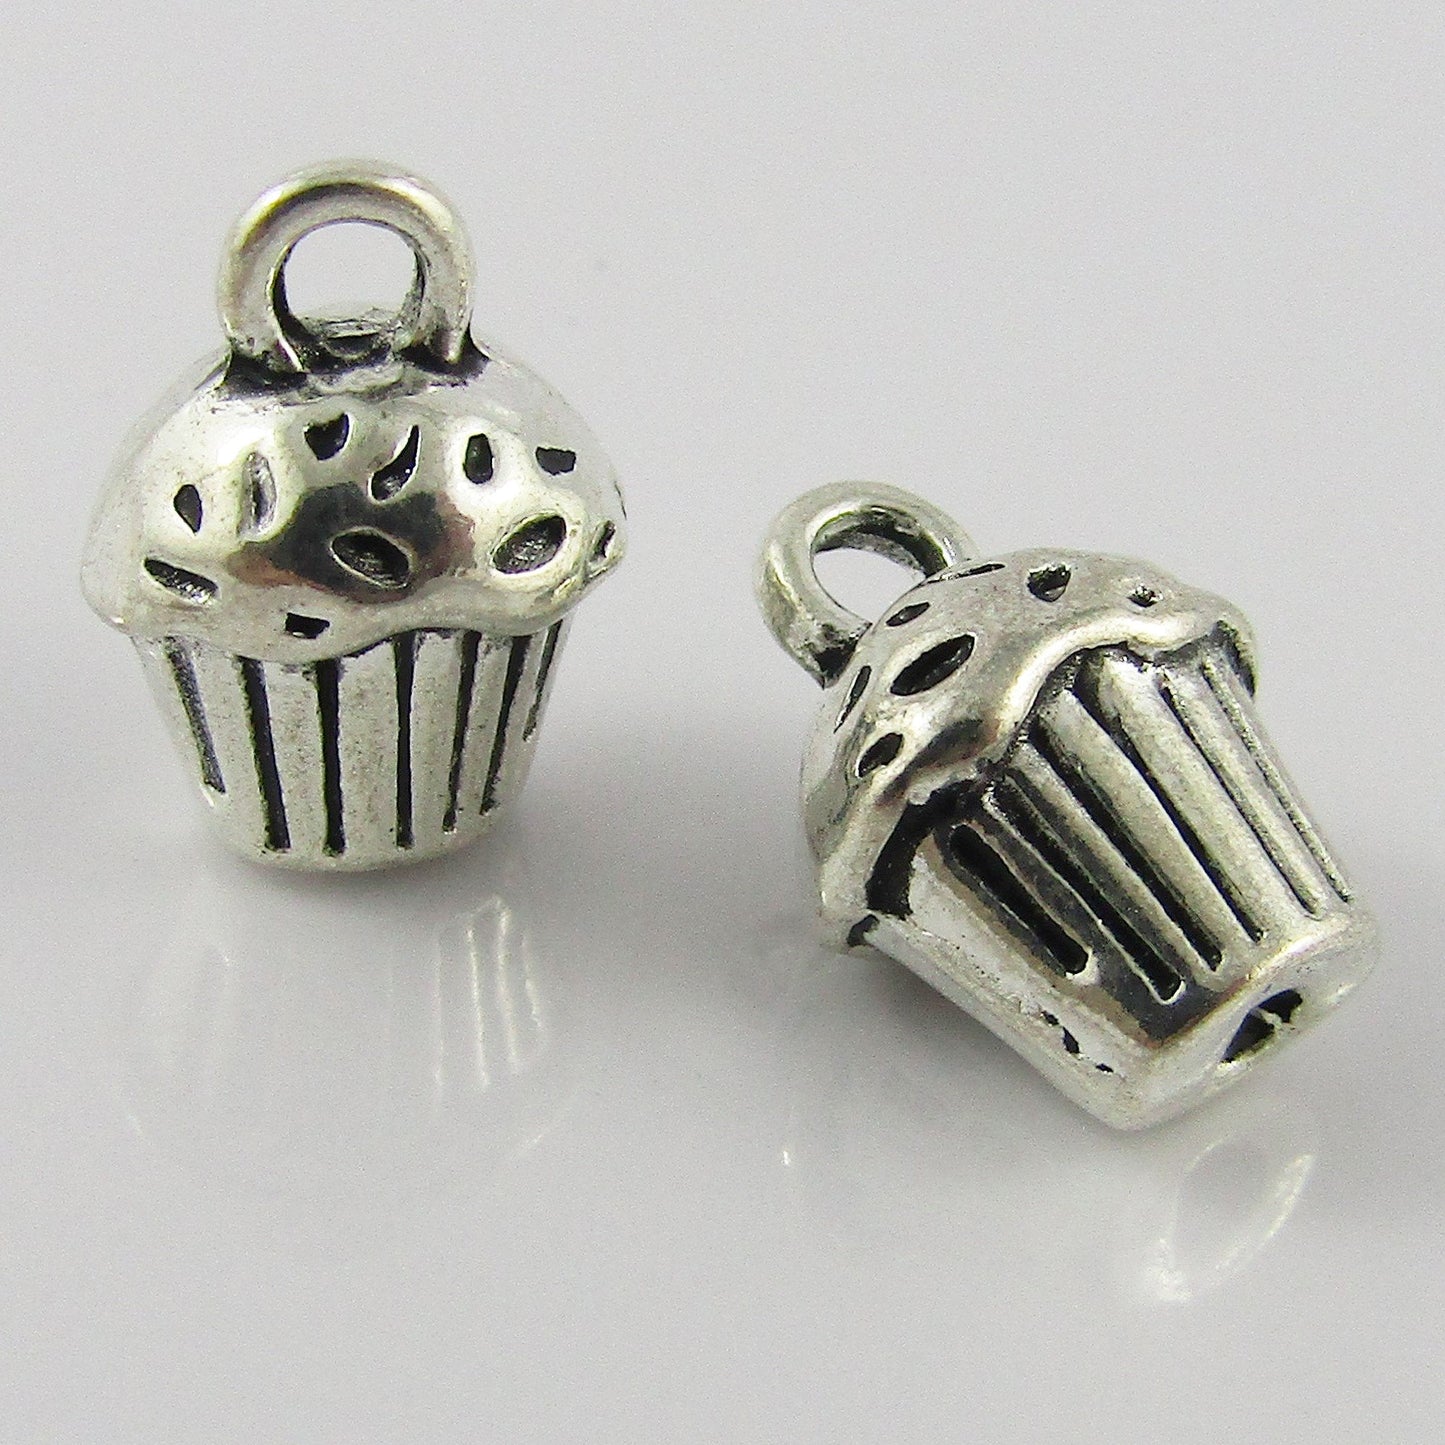 Bulk Muffin Cupcake Charm Pendant 3D Bakery Sweet Food Alloy 14x10mm Select Qty